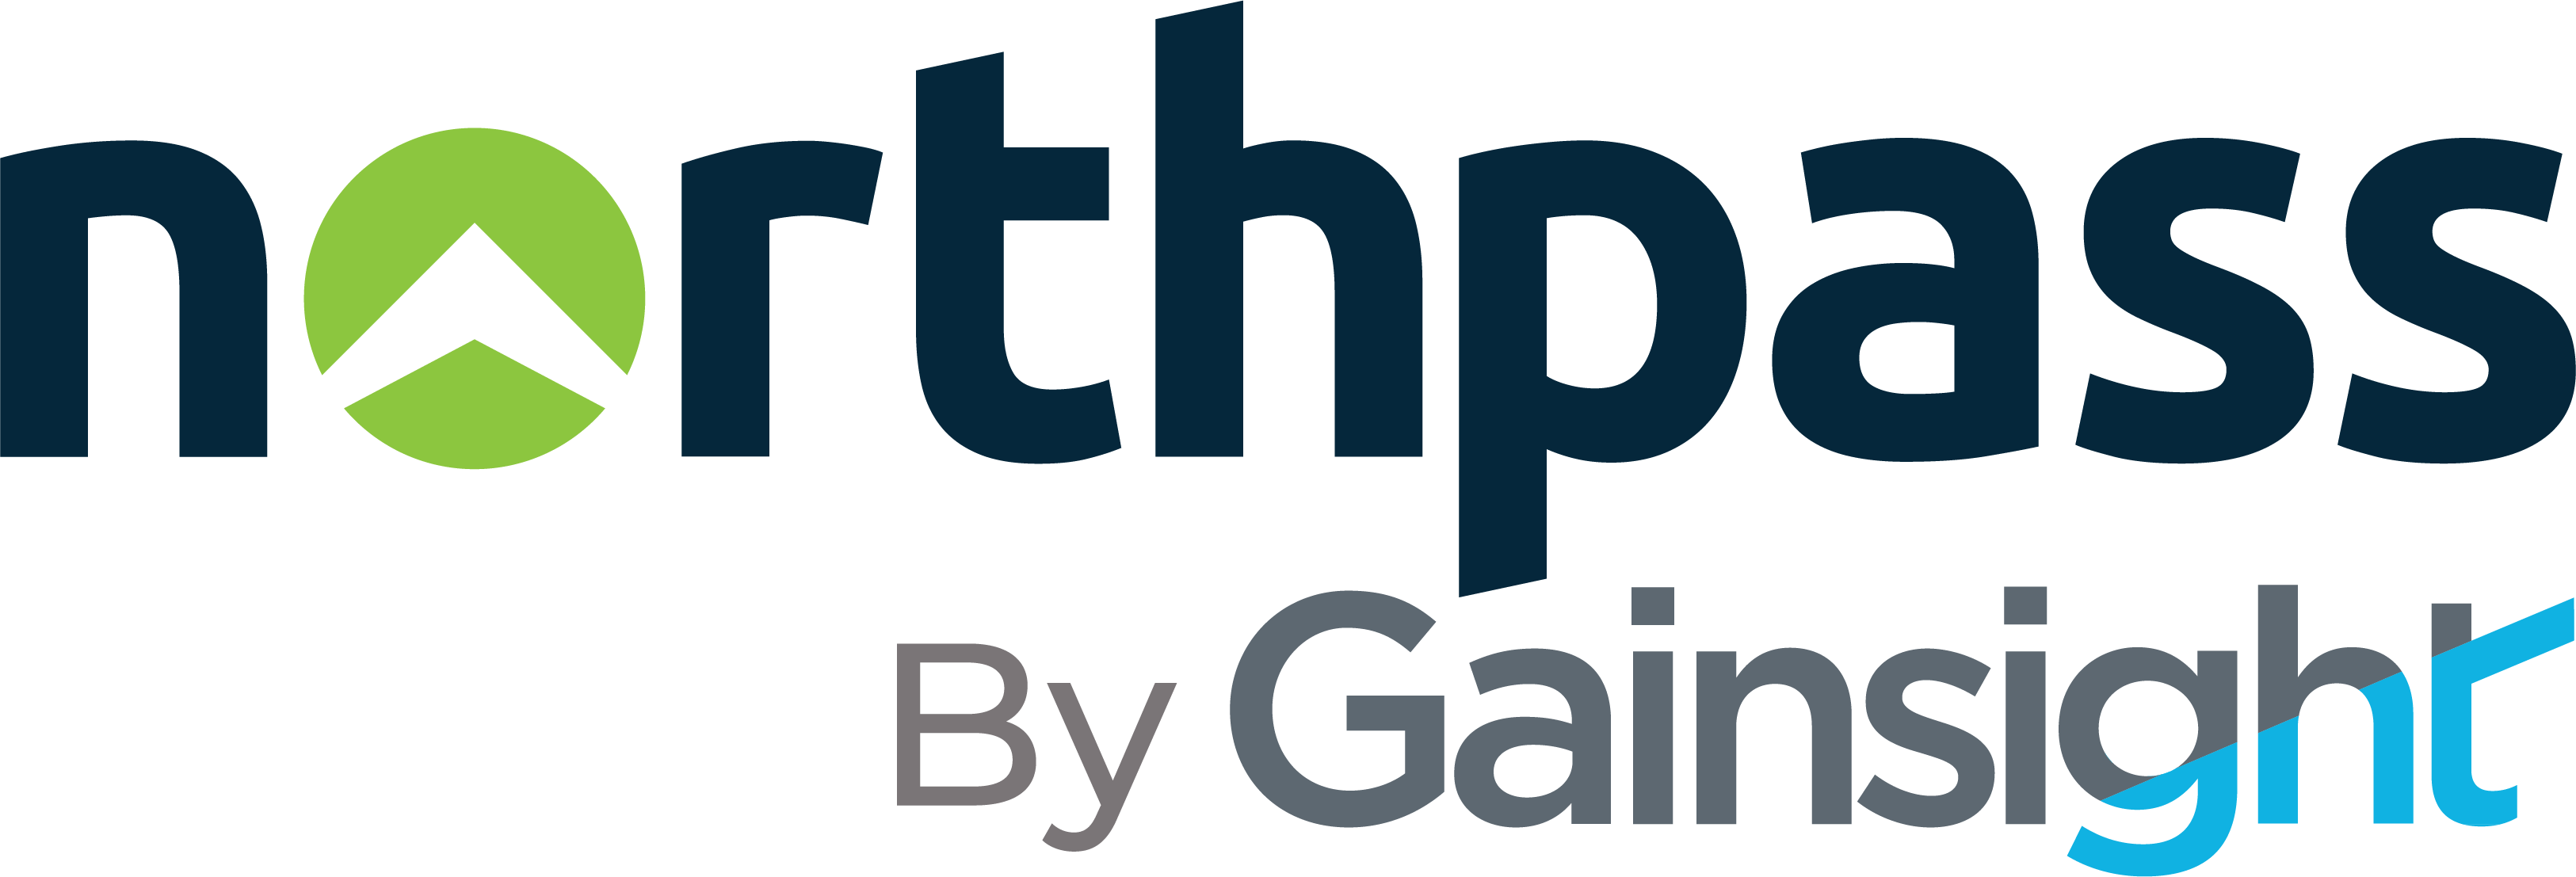 northpass-logo.png